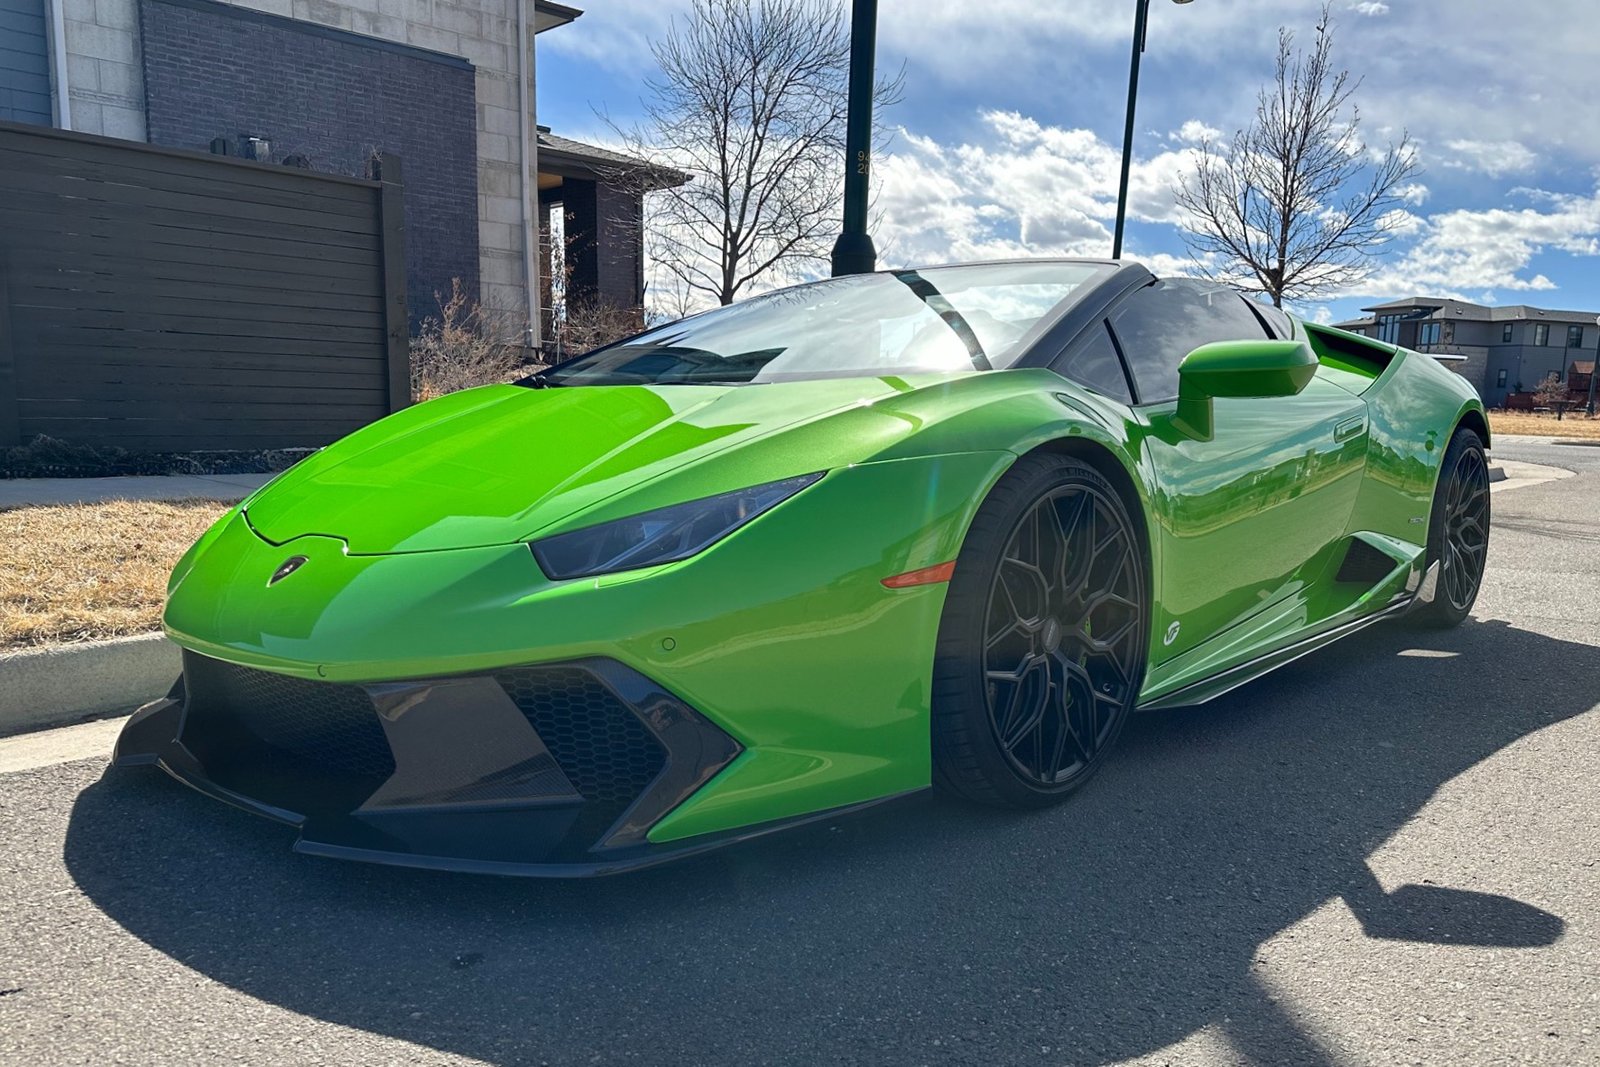 Used 2017 Lamborghini Huracan Spyder VF Supercharged For Sale